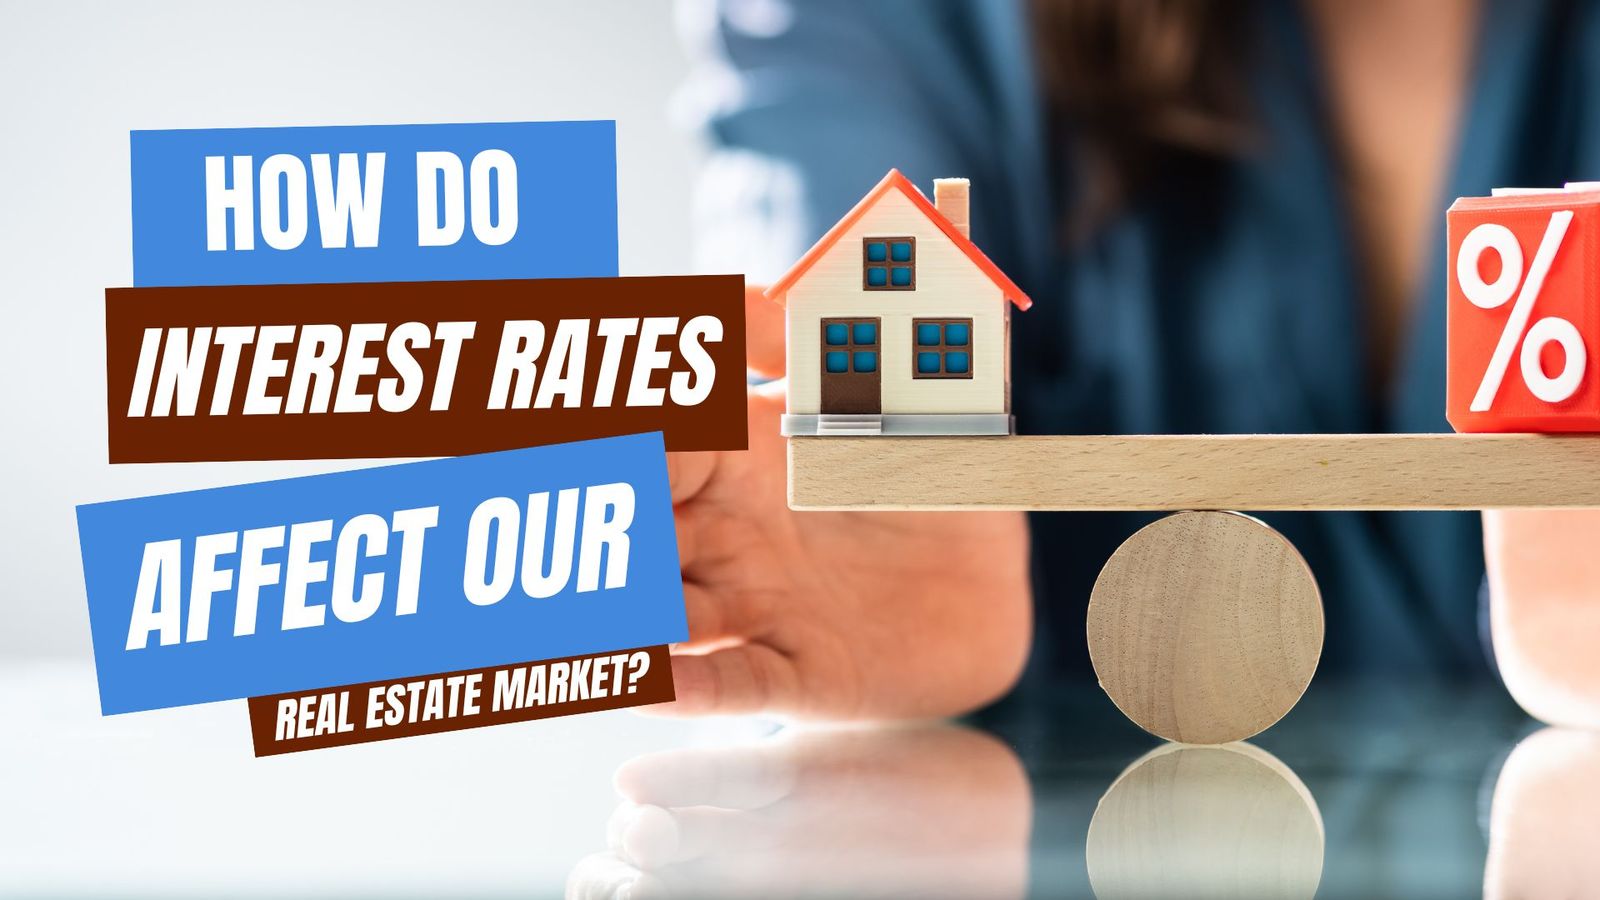 How Do Interest Rates Affect Our Real Estate Market?